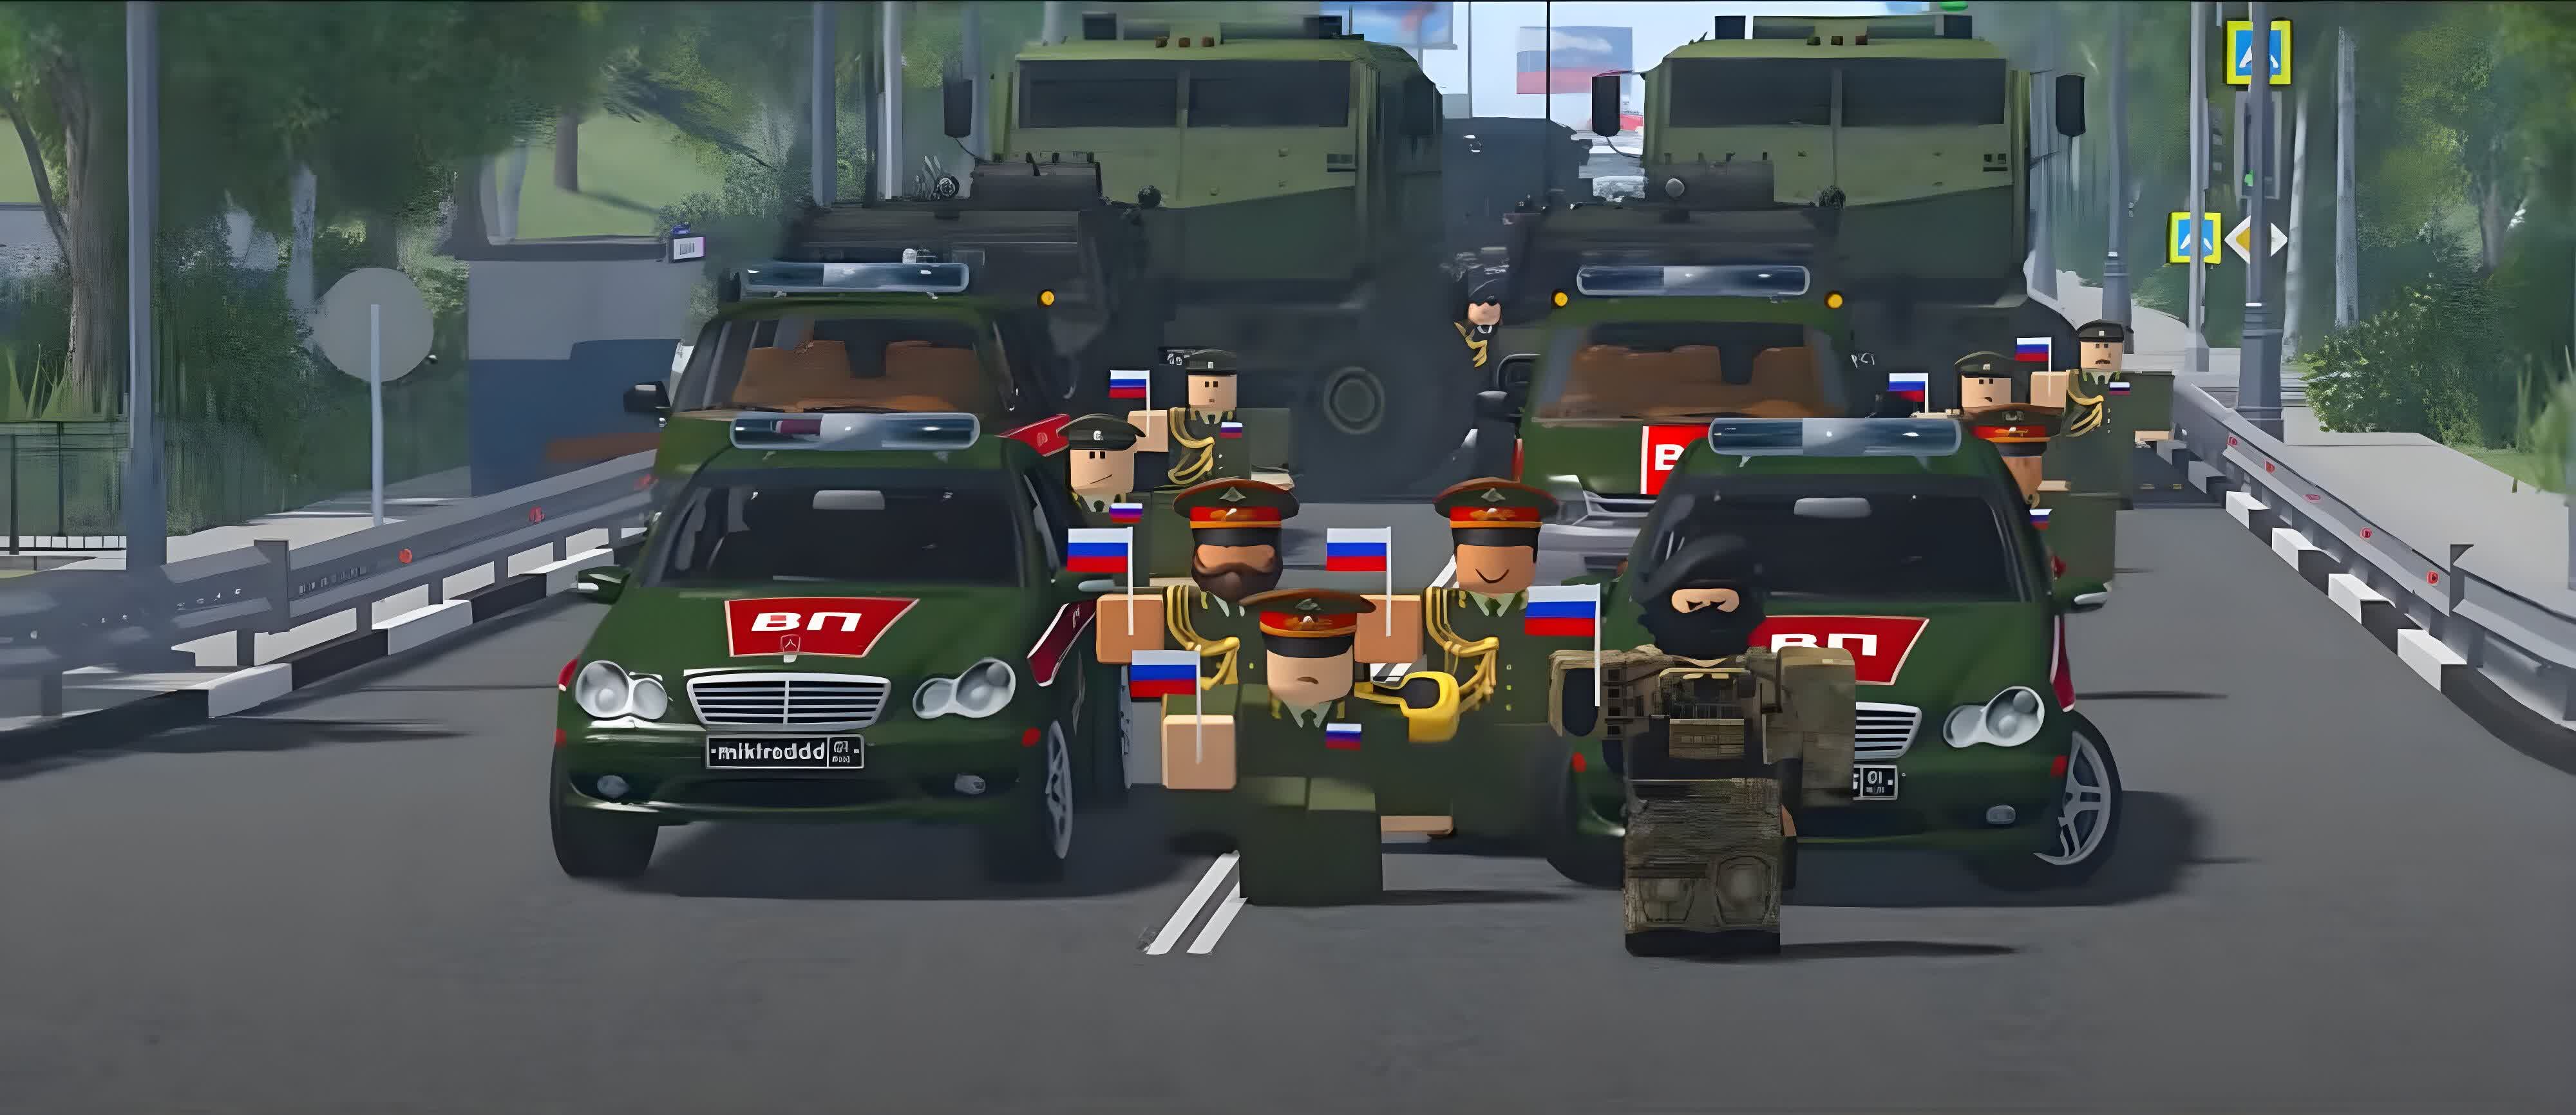 Russia's propaganda finds a home in Minecraft, Roblox, and other games